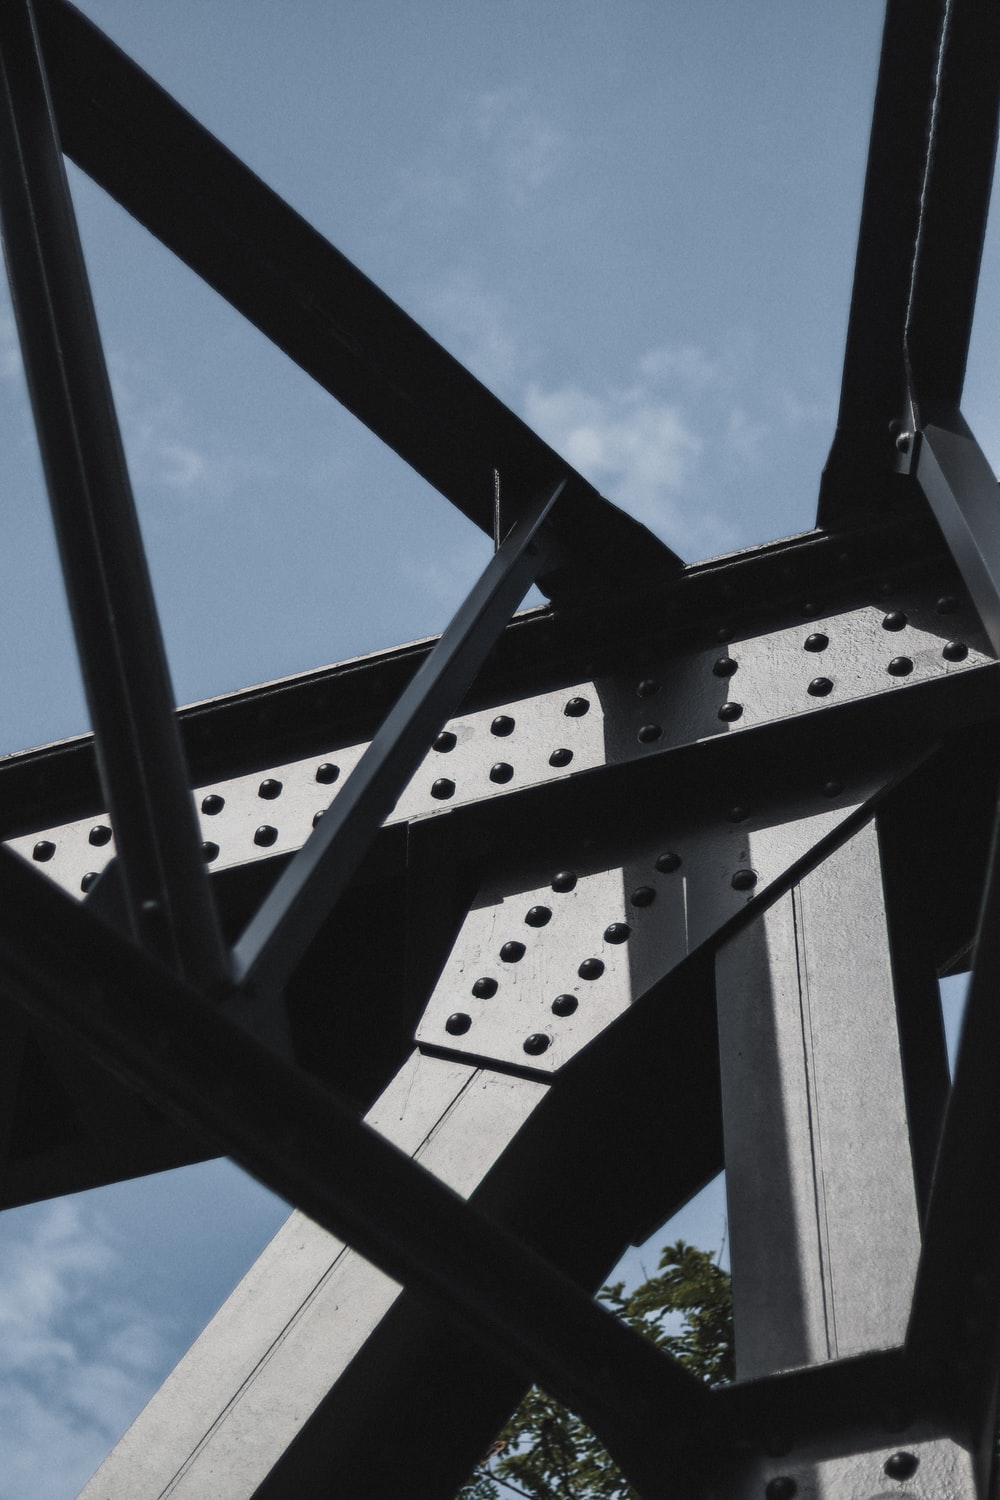 Structural Engineering Picture. Download Free Image